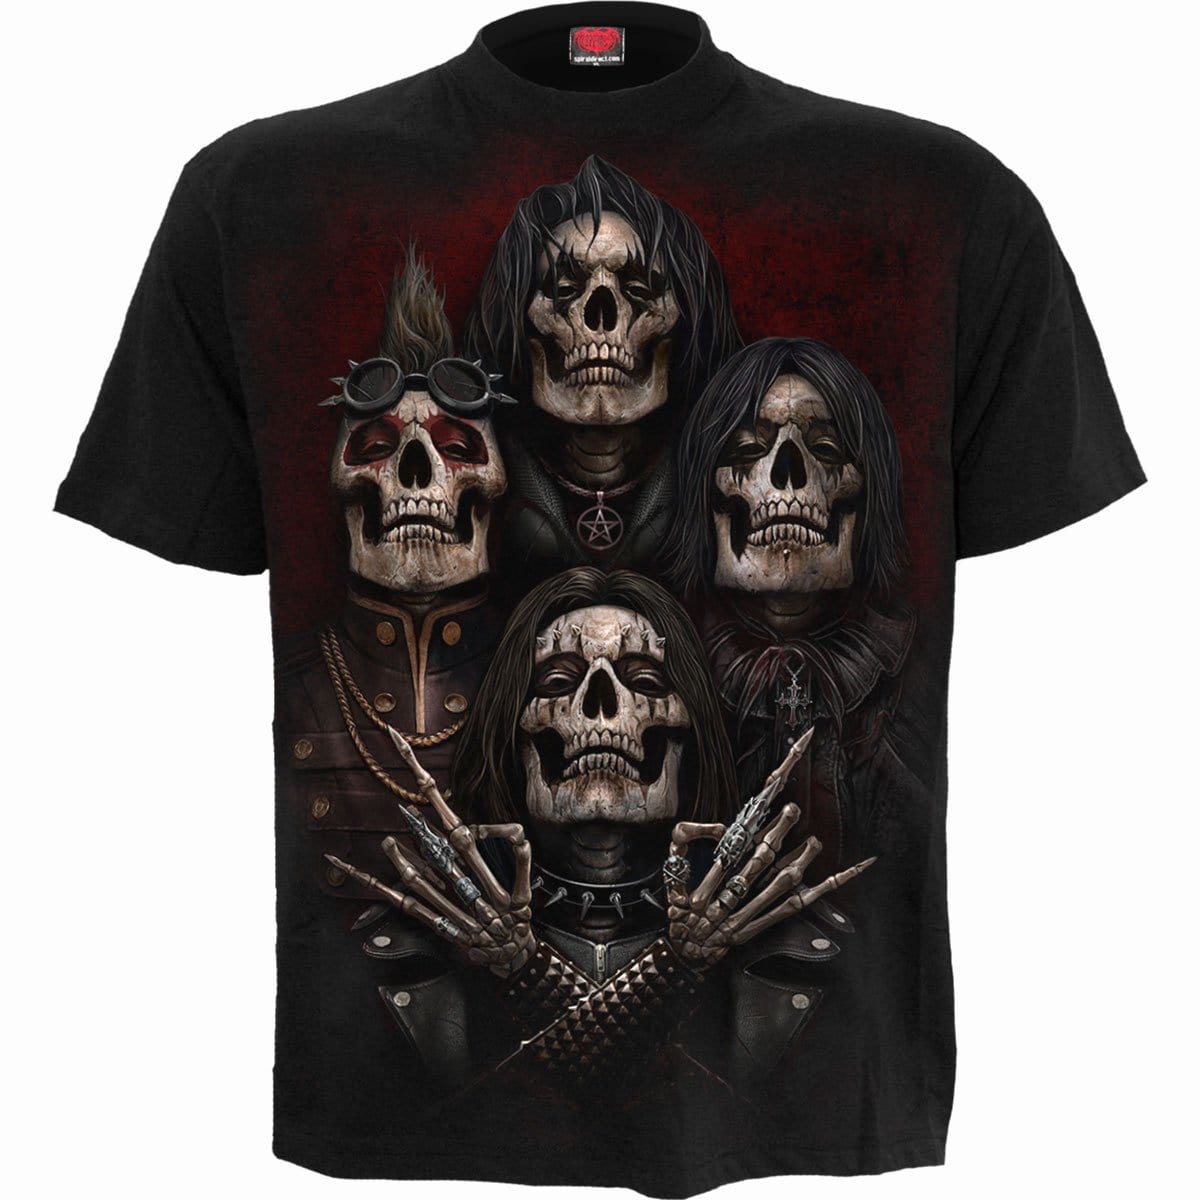 FACES OF GOTH - T-Shirt Black - Spiral USA